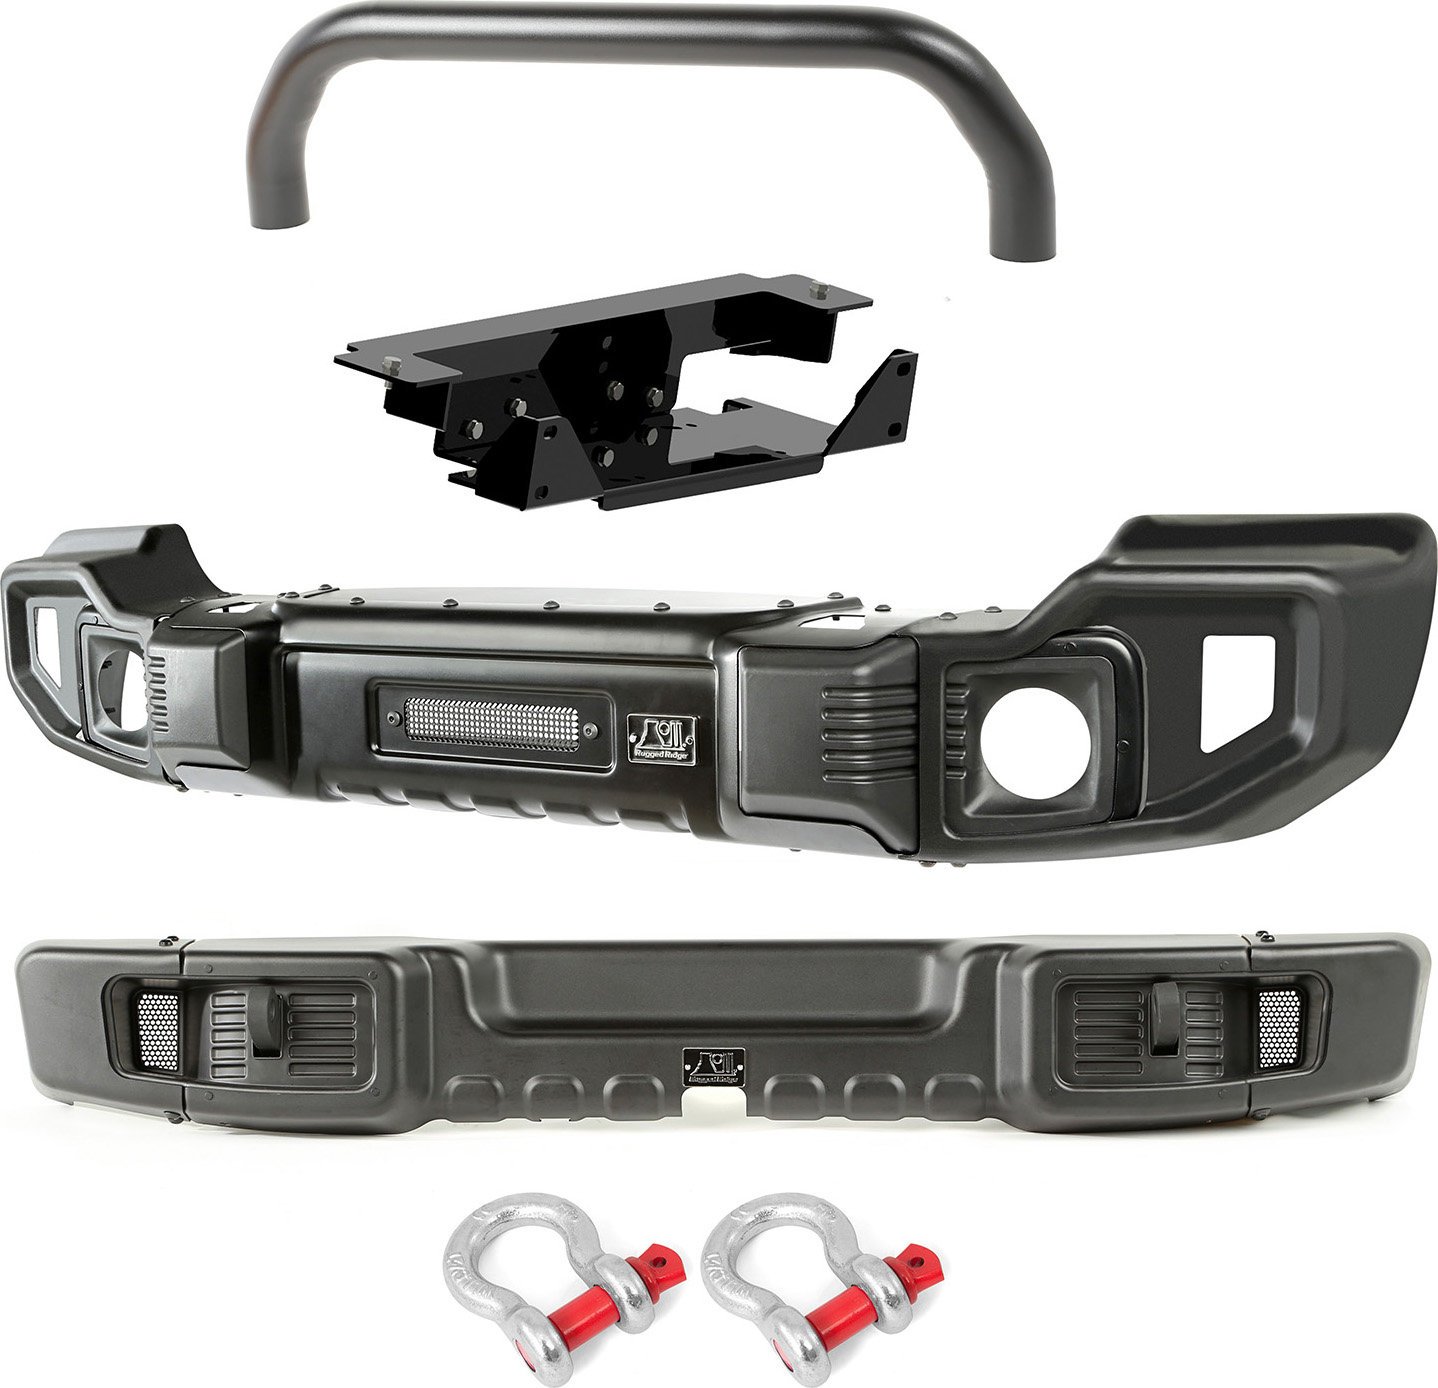 Rugged Ridge  Spartacus Overrider Bumper Set with Winch Plate for  07-18 Jeep Wrangler JK | Quadratec